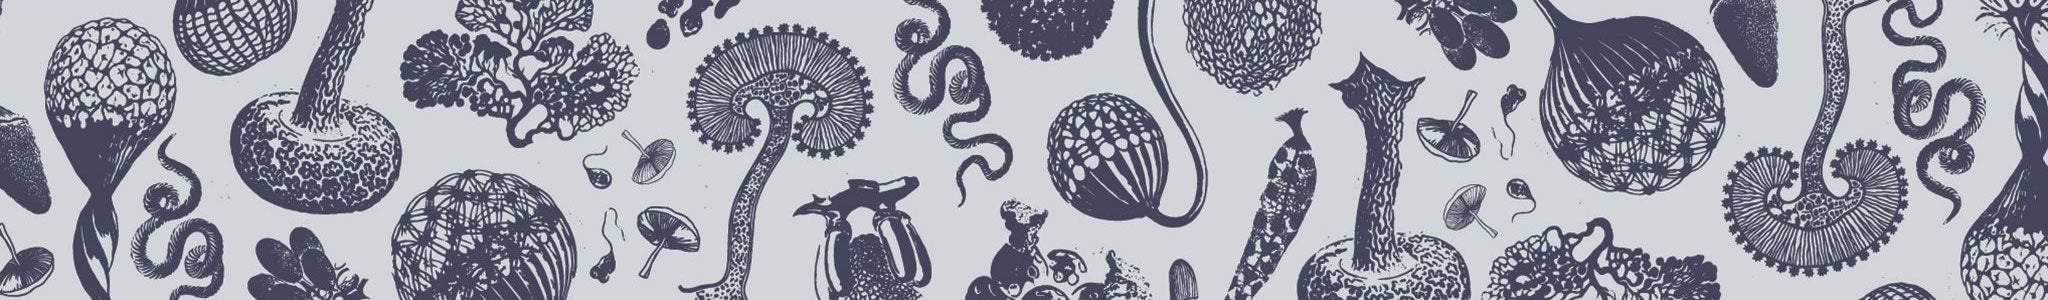 Pattern from the Hamilton's mushroom packaging showing abstract mushroom and plant shapes.